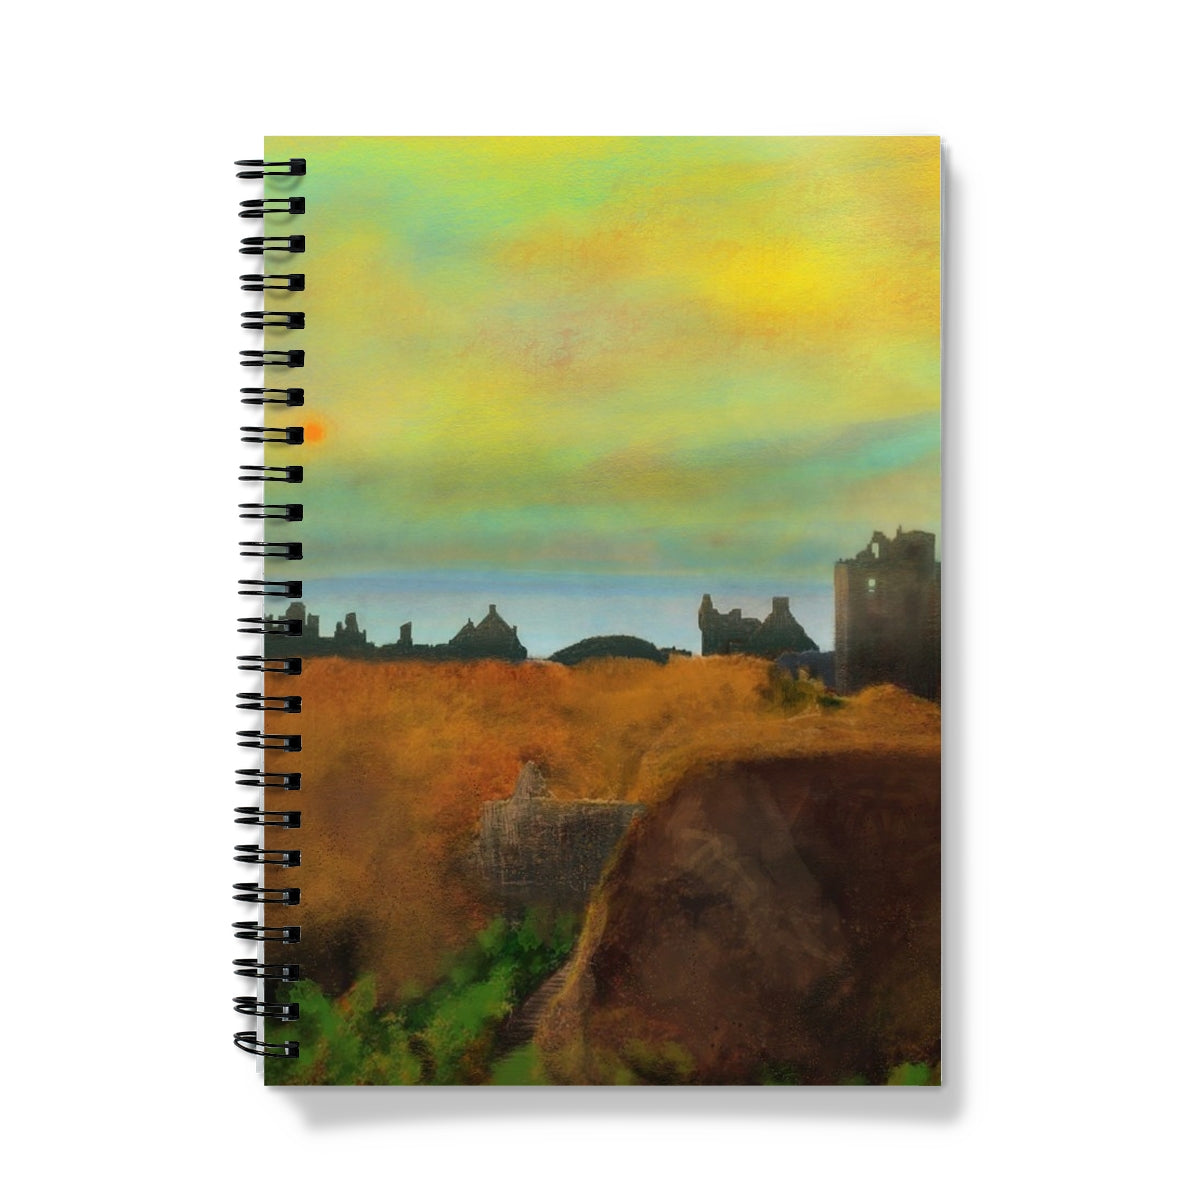 Dunnottar Castle Art Gifts Notebook-Journals & Notebooks-Historic & Iconic Scotland Art Gallery-A5-Lined-Paintings, Prints, Homeware, Art Gifts From Scotland By Scottish Artist Kevin Hunter